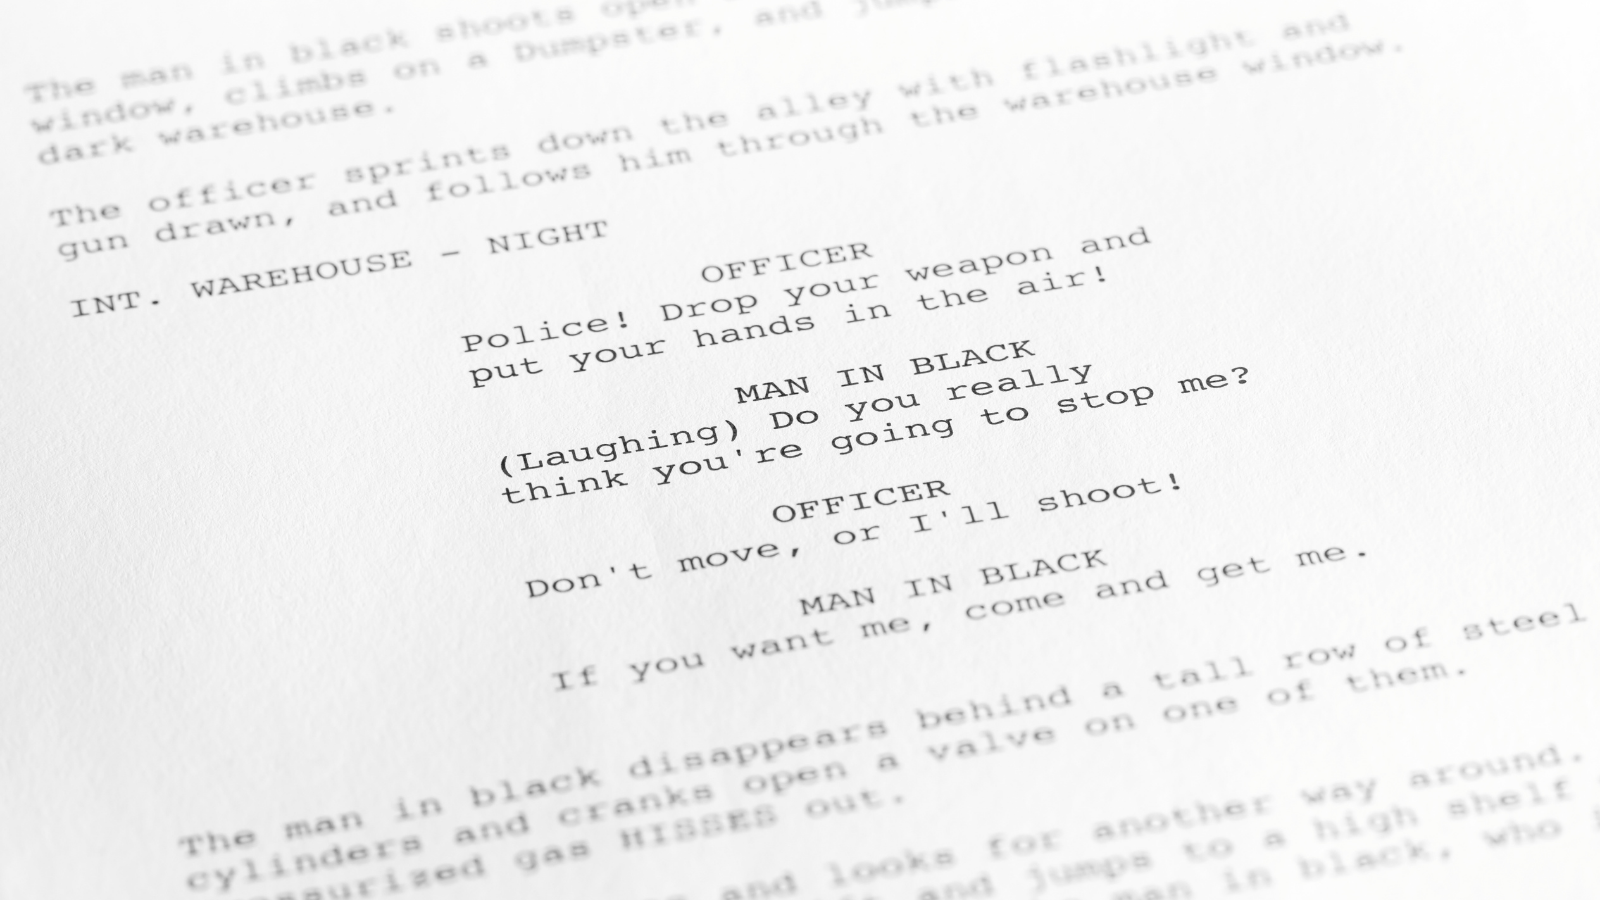 A close up of a segment of script with typewritten words on a page